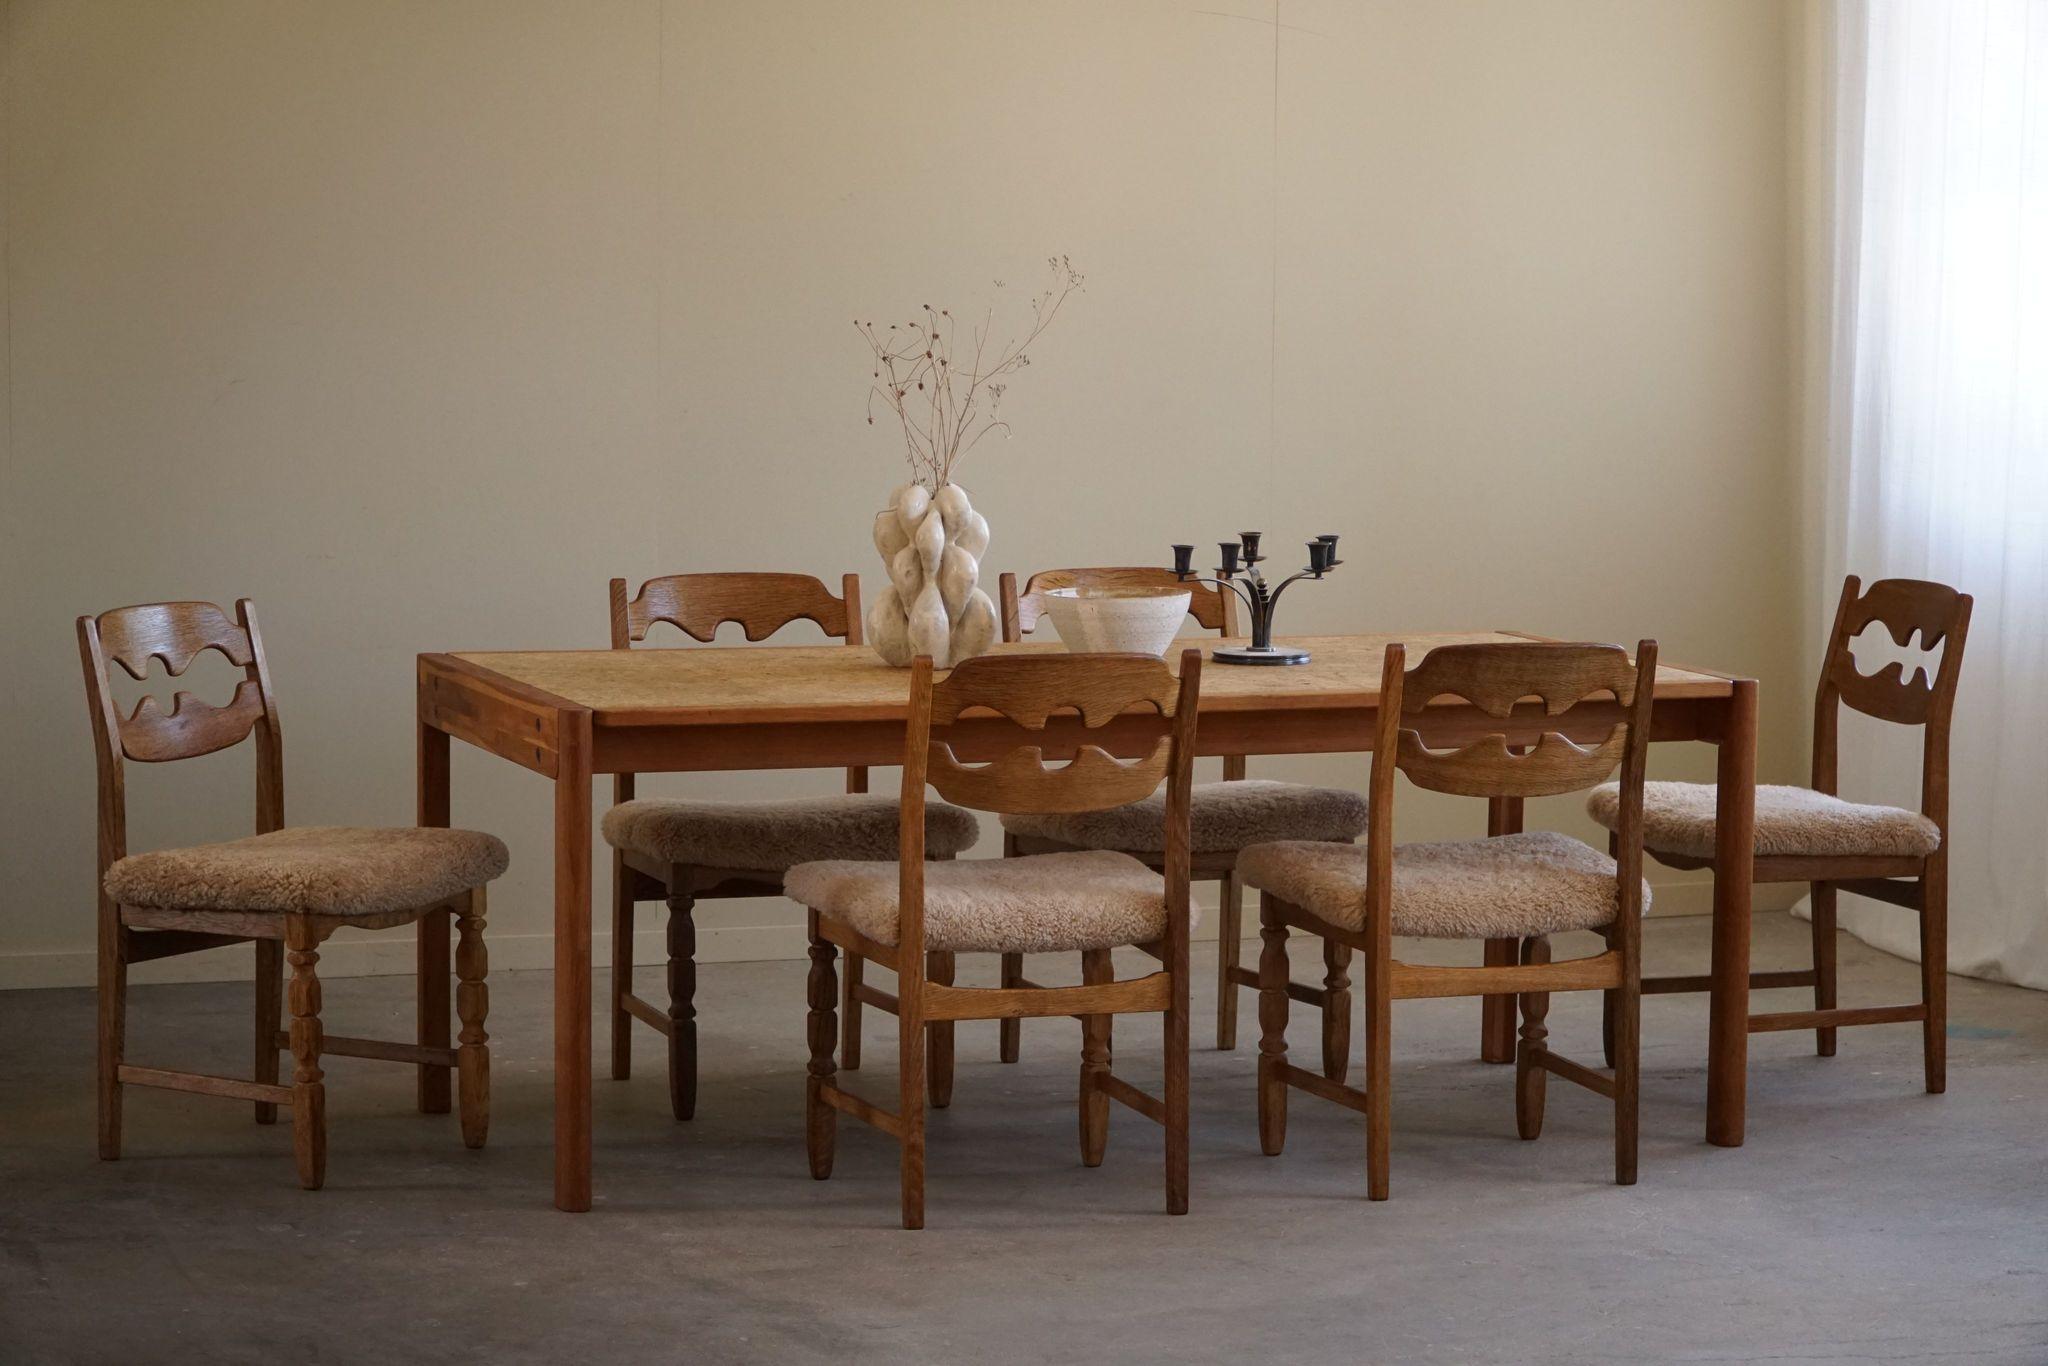 This rectangular dining table is a great example of Danish Mid Century Modern design, designed by Jørgen Bækmark for FDB in the 1960s. Crafted with meticulous attention to detail, it marries the warmth of oak with the unique texture of cork. The